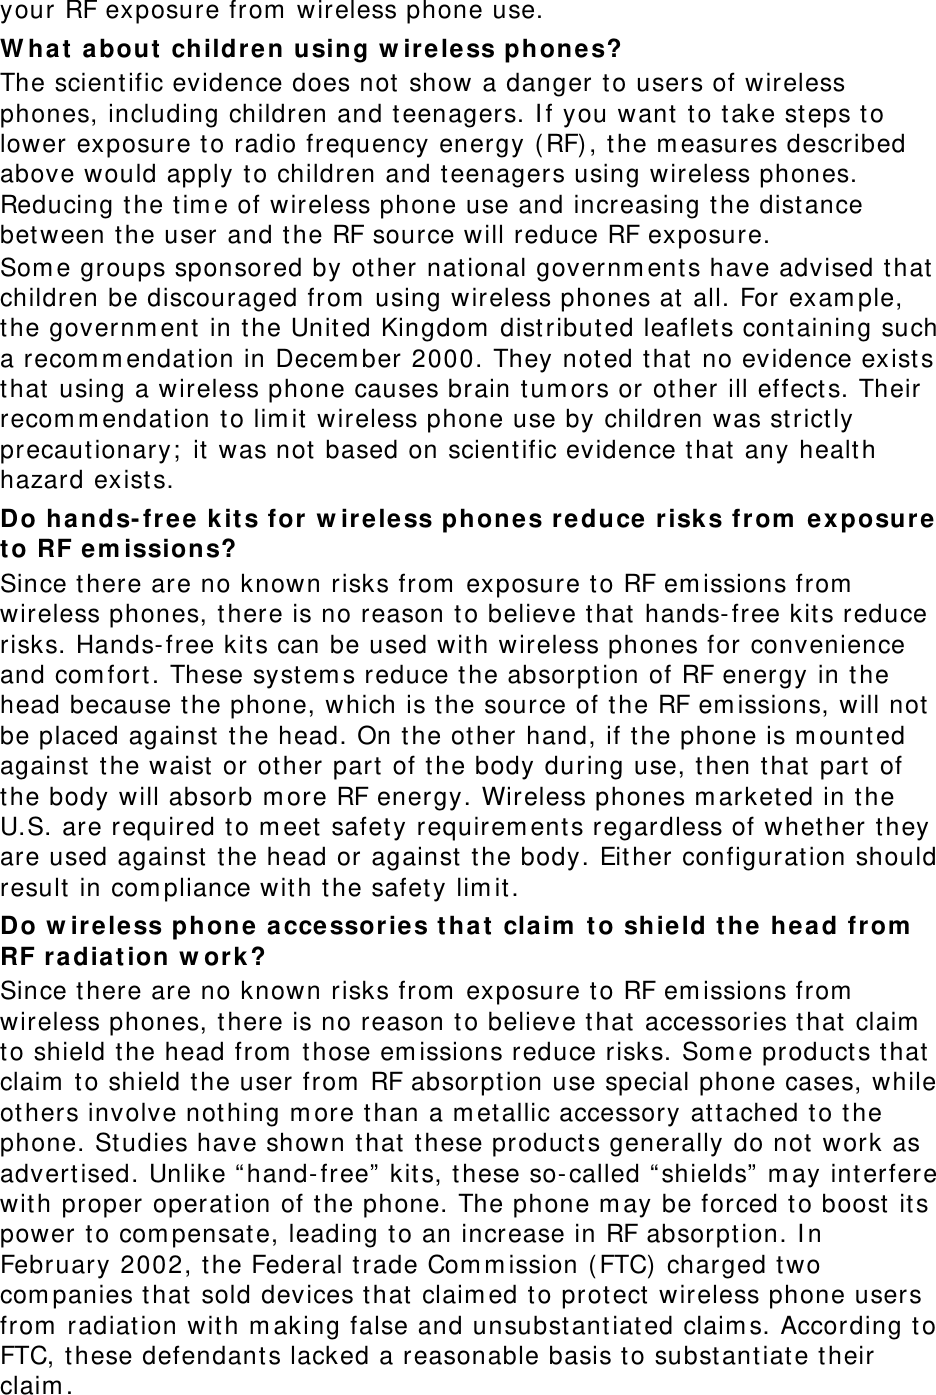 your RF exposure from  wireless phone use. W hat about childre n using w irele ss phone s? The scient ific evidence does not  show a danger t o users of wireless phones, including children and teenagers. I f you want t o t ake st eps to lower exposure to radio frequency energy ( RF) , t he m easures described above would apply t o children and t eenagers using wireless phones. Reducing t he tim e of wireless phone use and increasing t he dist ance bet ween t he user and the RF source will reduce RF exposure. Som e groups sponsored by ot her nat ional governm ents have advised that children be discouraged from  using wireless phones at  all. For exam ple, the governm ent in the United Kingdom  distribut ed leaflet s cont aining such a recom m endation in Decem ber 2000. They not ed t hat no evidence exists that using a wireless phone causes brain tum ors or other ill effect s. Their recom m endation t o lim it  wireless phone use by children was st rict ly precautionary;  it  was not based on scientific evidence that any health hazard exist s.   Do ha nds- fr ee kit s for w irele ss ph ones reduce risks from  exposure t o RF em issions? Since there are no known risks from  exposure to RF em issions from  wireless phones, there is no reason t o believe t hat hands- free kits reduce risks. Hands-free kit s can be used with wireless phones for convenience and com fort . These system s reduce t he absorpt ion of RF energy in the head because the phone, which is the source of t he RF em issions, will not be placed against  t he head. On t he other hand, if the phone is m ounted against  the waist or ot her part of t he body during use, t hen t hat  part  of the body will absorb m ore RF energy. Wireless phones m arketed in t he U.S. are required to m eet  safety requirem ent s regardless of whet her t hey are used against t he head or against  t he body. Eit her configuration should result in com pliance with t he safety lim it . Do w ireless phone accessorie s t ha t  cla im  t o shield t he  he a d from  RF radiat ion w ork? Since there are no known risks from  exposure to RF em issions from  wireless phones, there is no reason t o believe t hat accessories t hat  claim  to shield t he head from  t hose em issions reduce risks. Som e product s t hat  claim  to shield t he user from  RF absorpt ion use special phone cases, while others involve not hing m ore than a m etallic accessory att ached t o t he phone. St udies have shown t hat these product s generally do not  work as advert ised. Unlike “ hand- free”  kit s, t hese so- called “ shields”  m ay int erfere with proper operation of t he phone. The phone m ay be forced t o boost  its power to com pensat e, leading t o an increase in RF absorpt ion. I n February 2002, the Federal trade Com m ission ( FTC) charged two com panies t hat  sold devices t hat  claim ed t o prot ect  wireless phone users from  radiat ion with m aking false and unsubst ant iated claim s. According t o FTC, these defendants lacked a reasonable basis t o subst ant iat e their claim . 